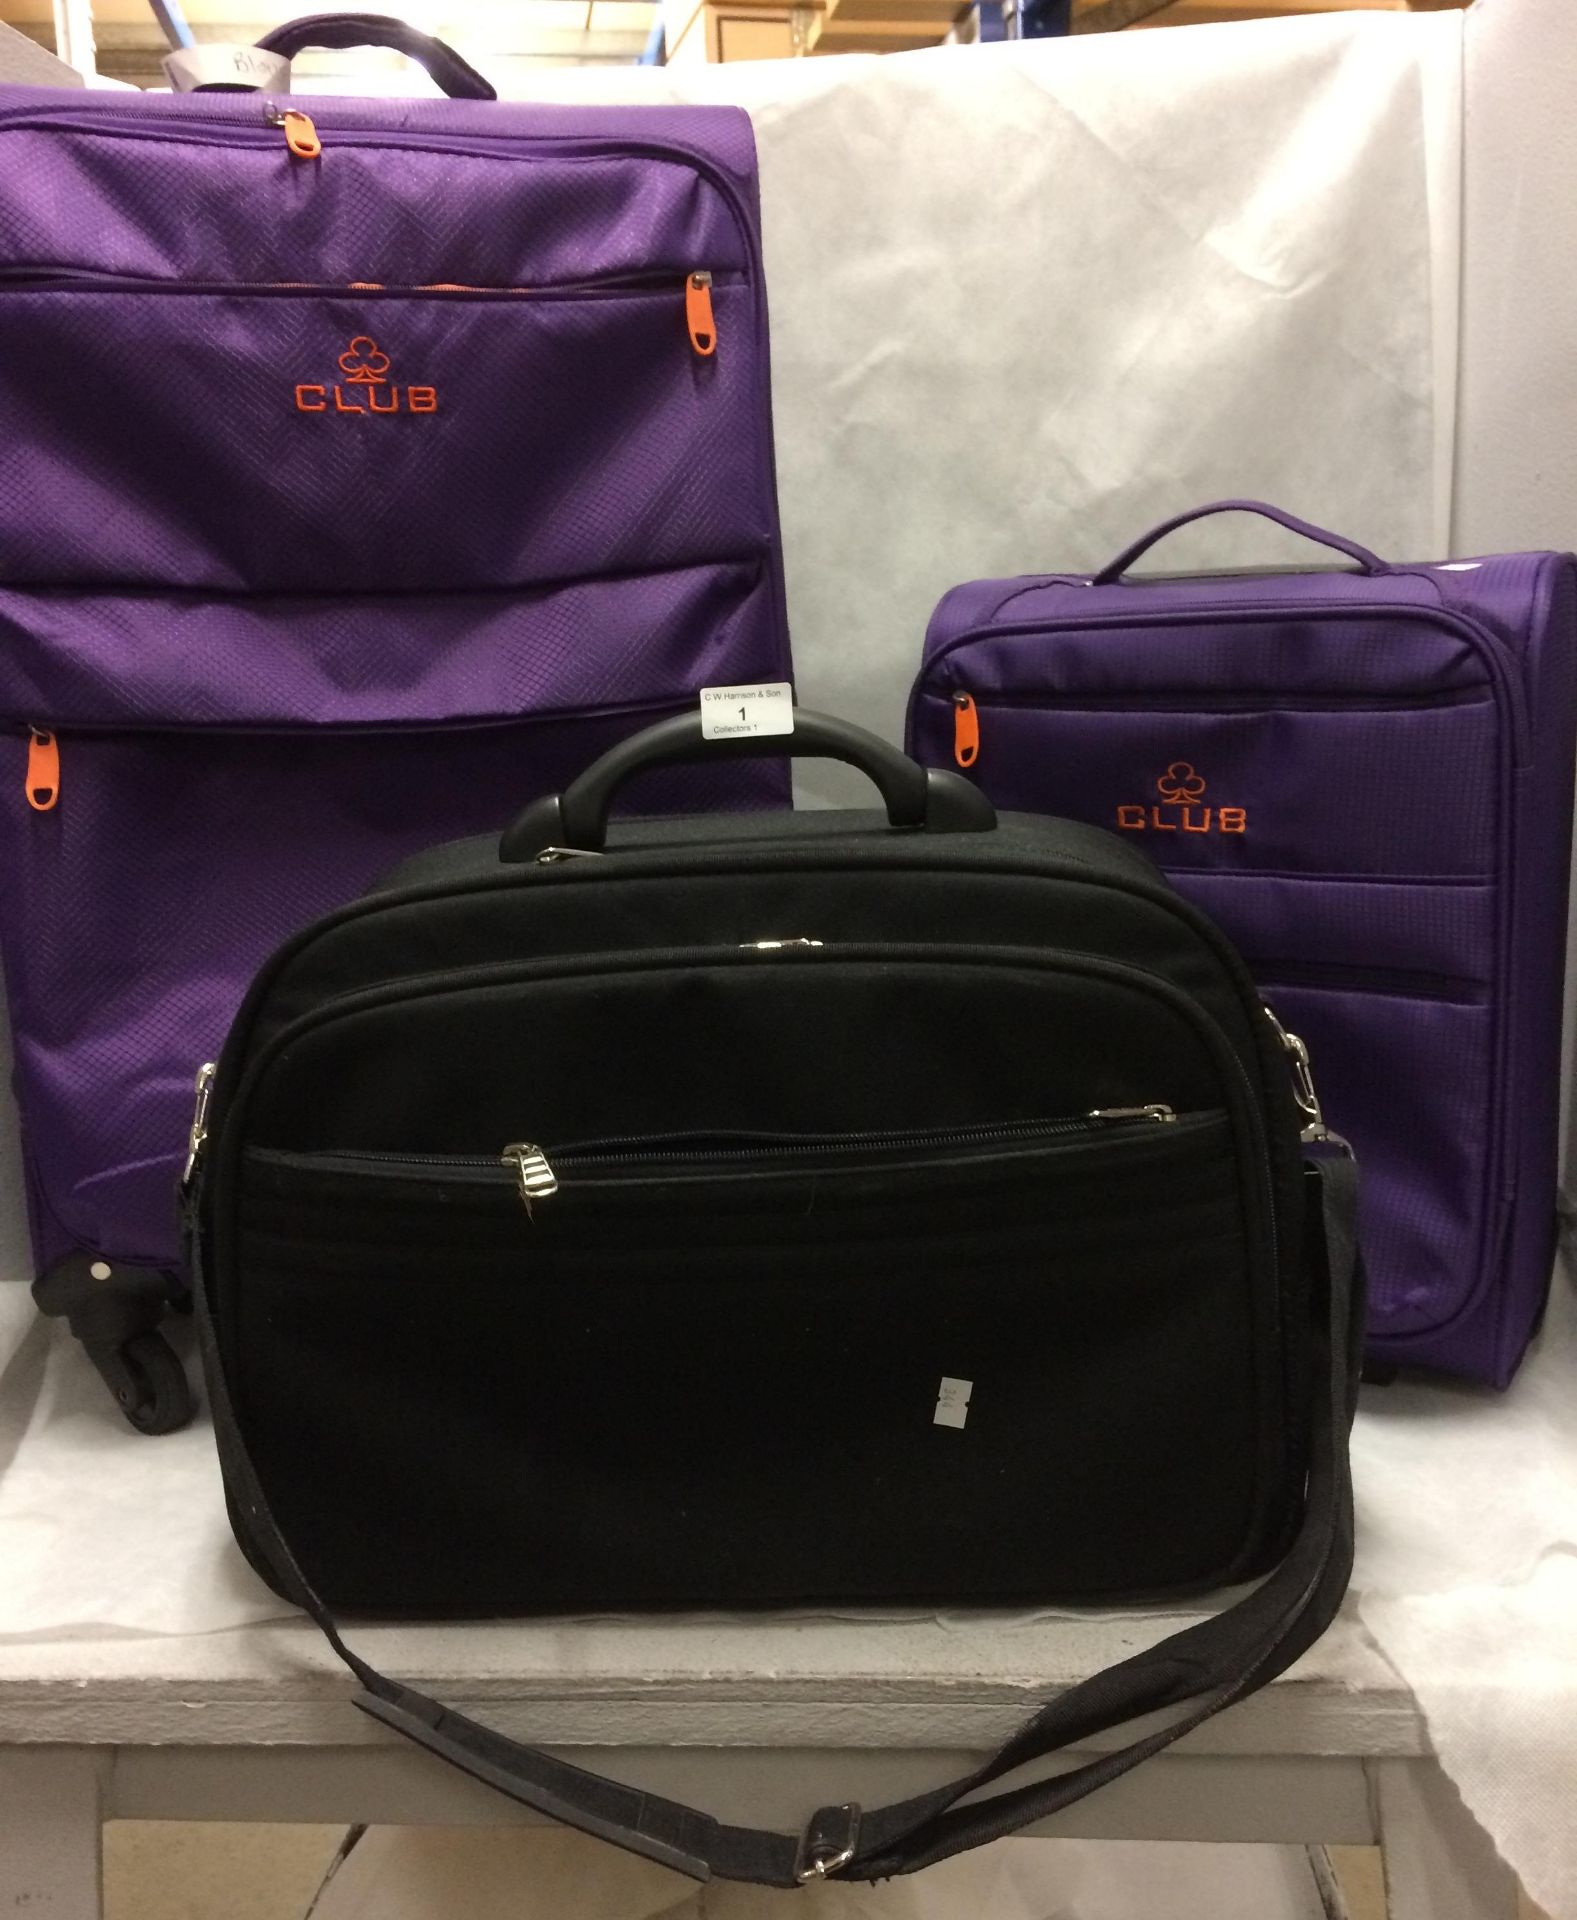 3 x assorted suitcases - 2 x Club and 1 other (3)